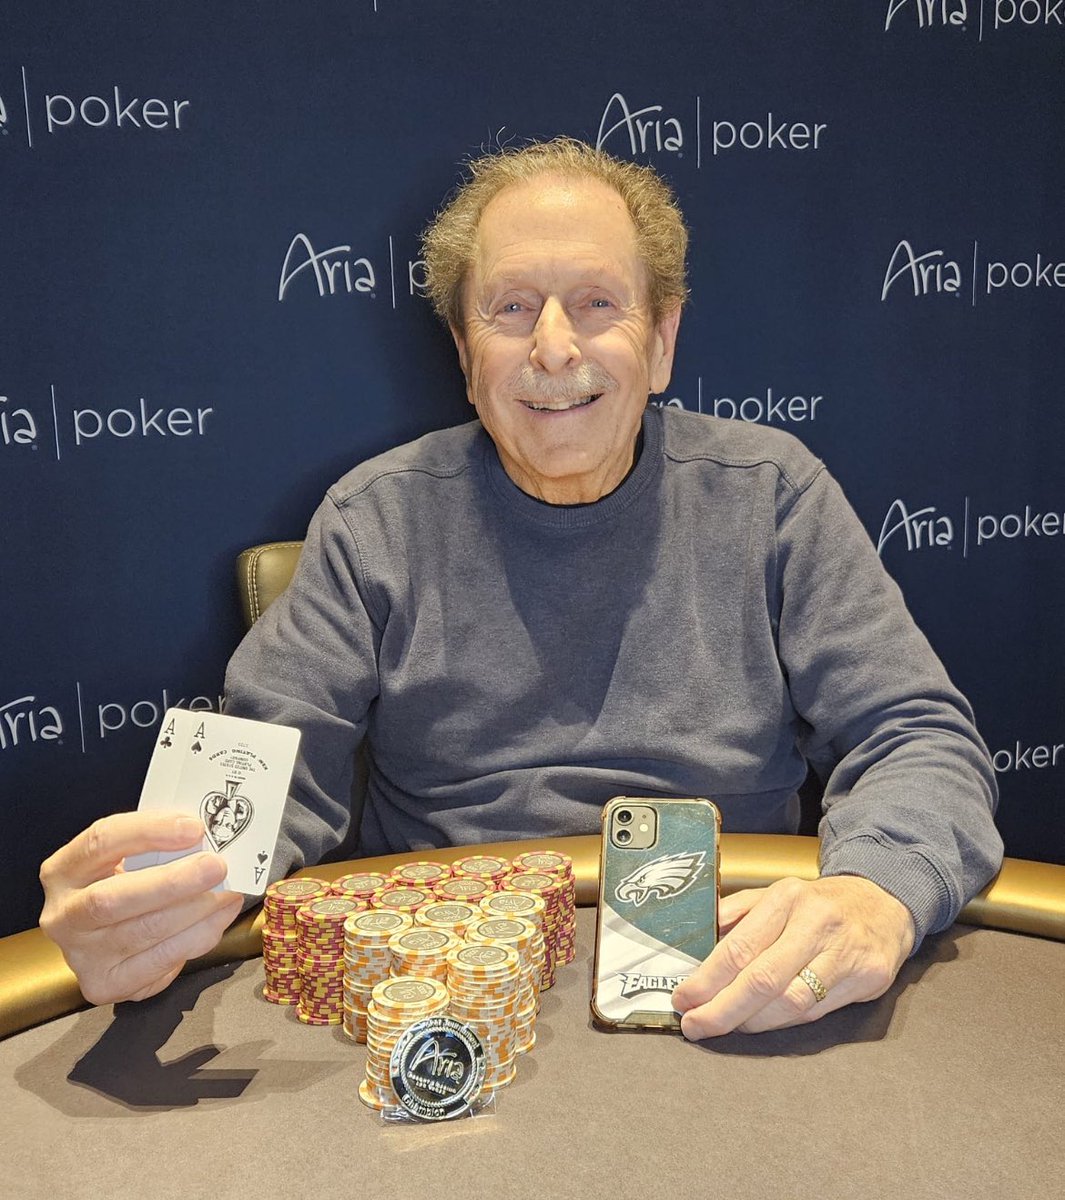 On Thursday, May 2nd our $160 NLH Tournament concluded with Richard Ziskind (Las Vegas, NV) taking home first place money from a five-way chop. The $1,207 win came over a field of 43 entries which generated an overall prize pool of $5,375! Congrats Richard!